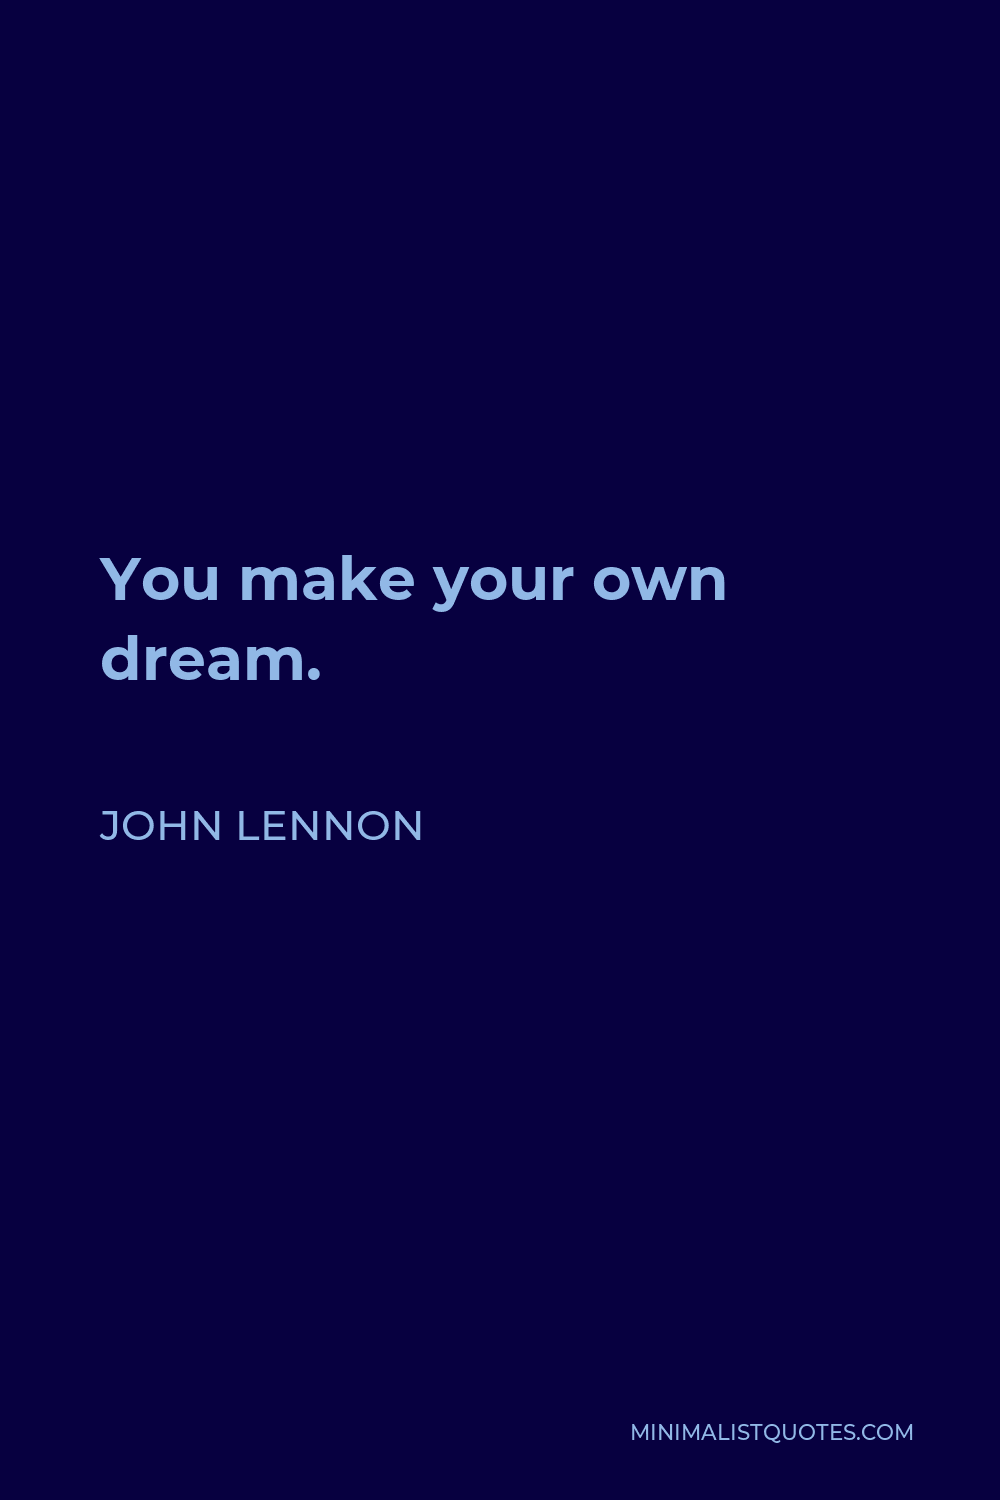 John Lennon Quote - You make your own dream.